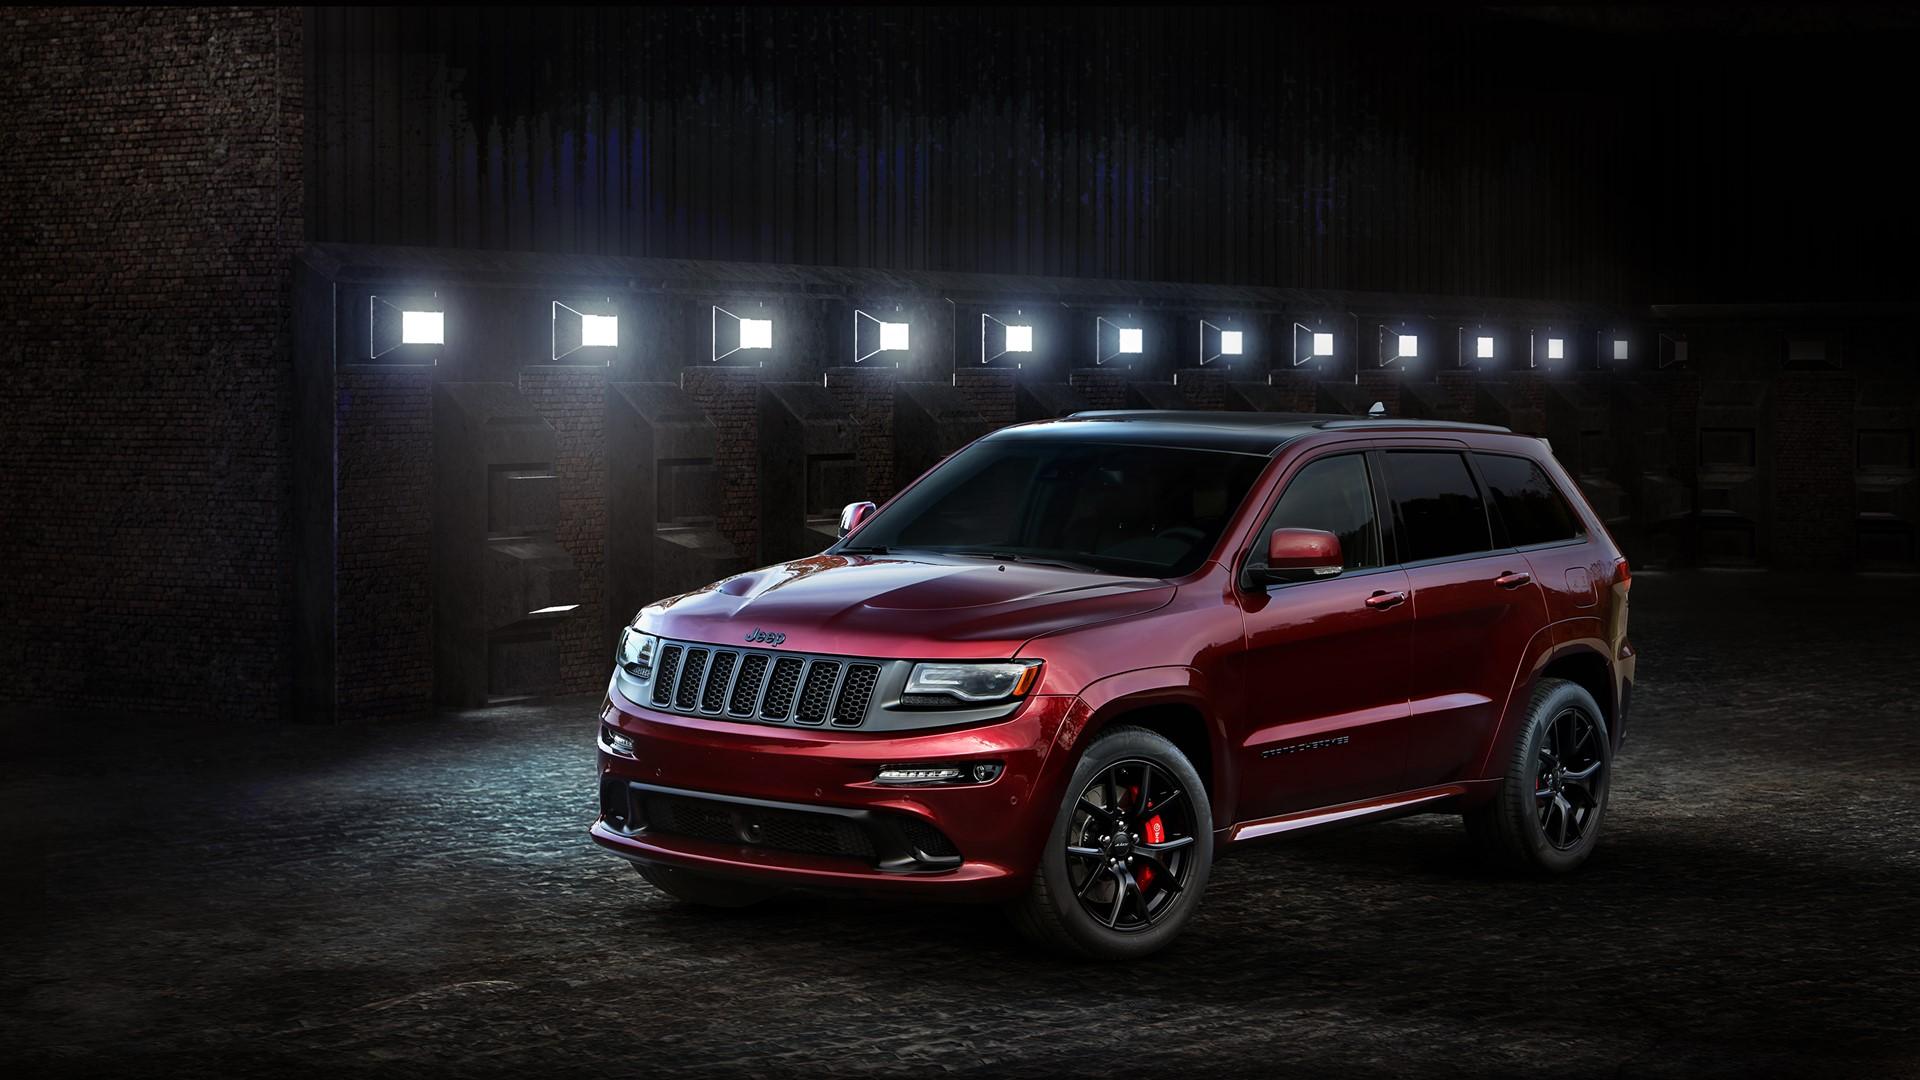 The Jeep Grand Cherokee Trackhawk is Real, And Will Debut at The New